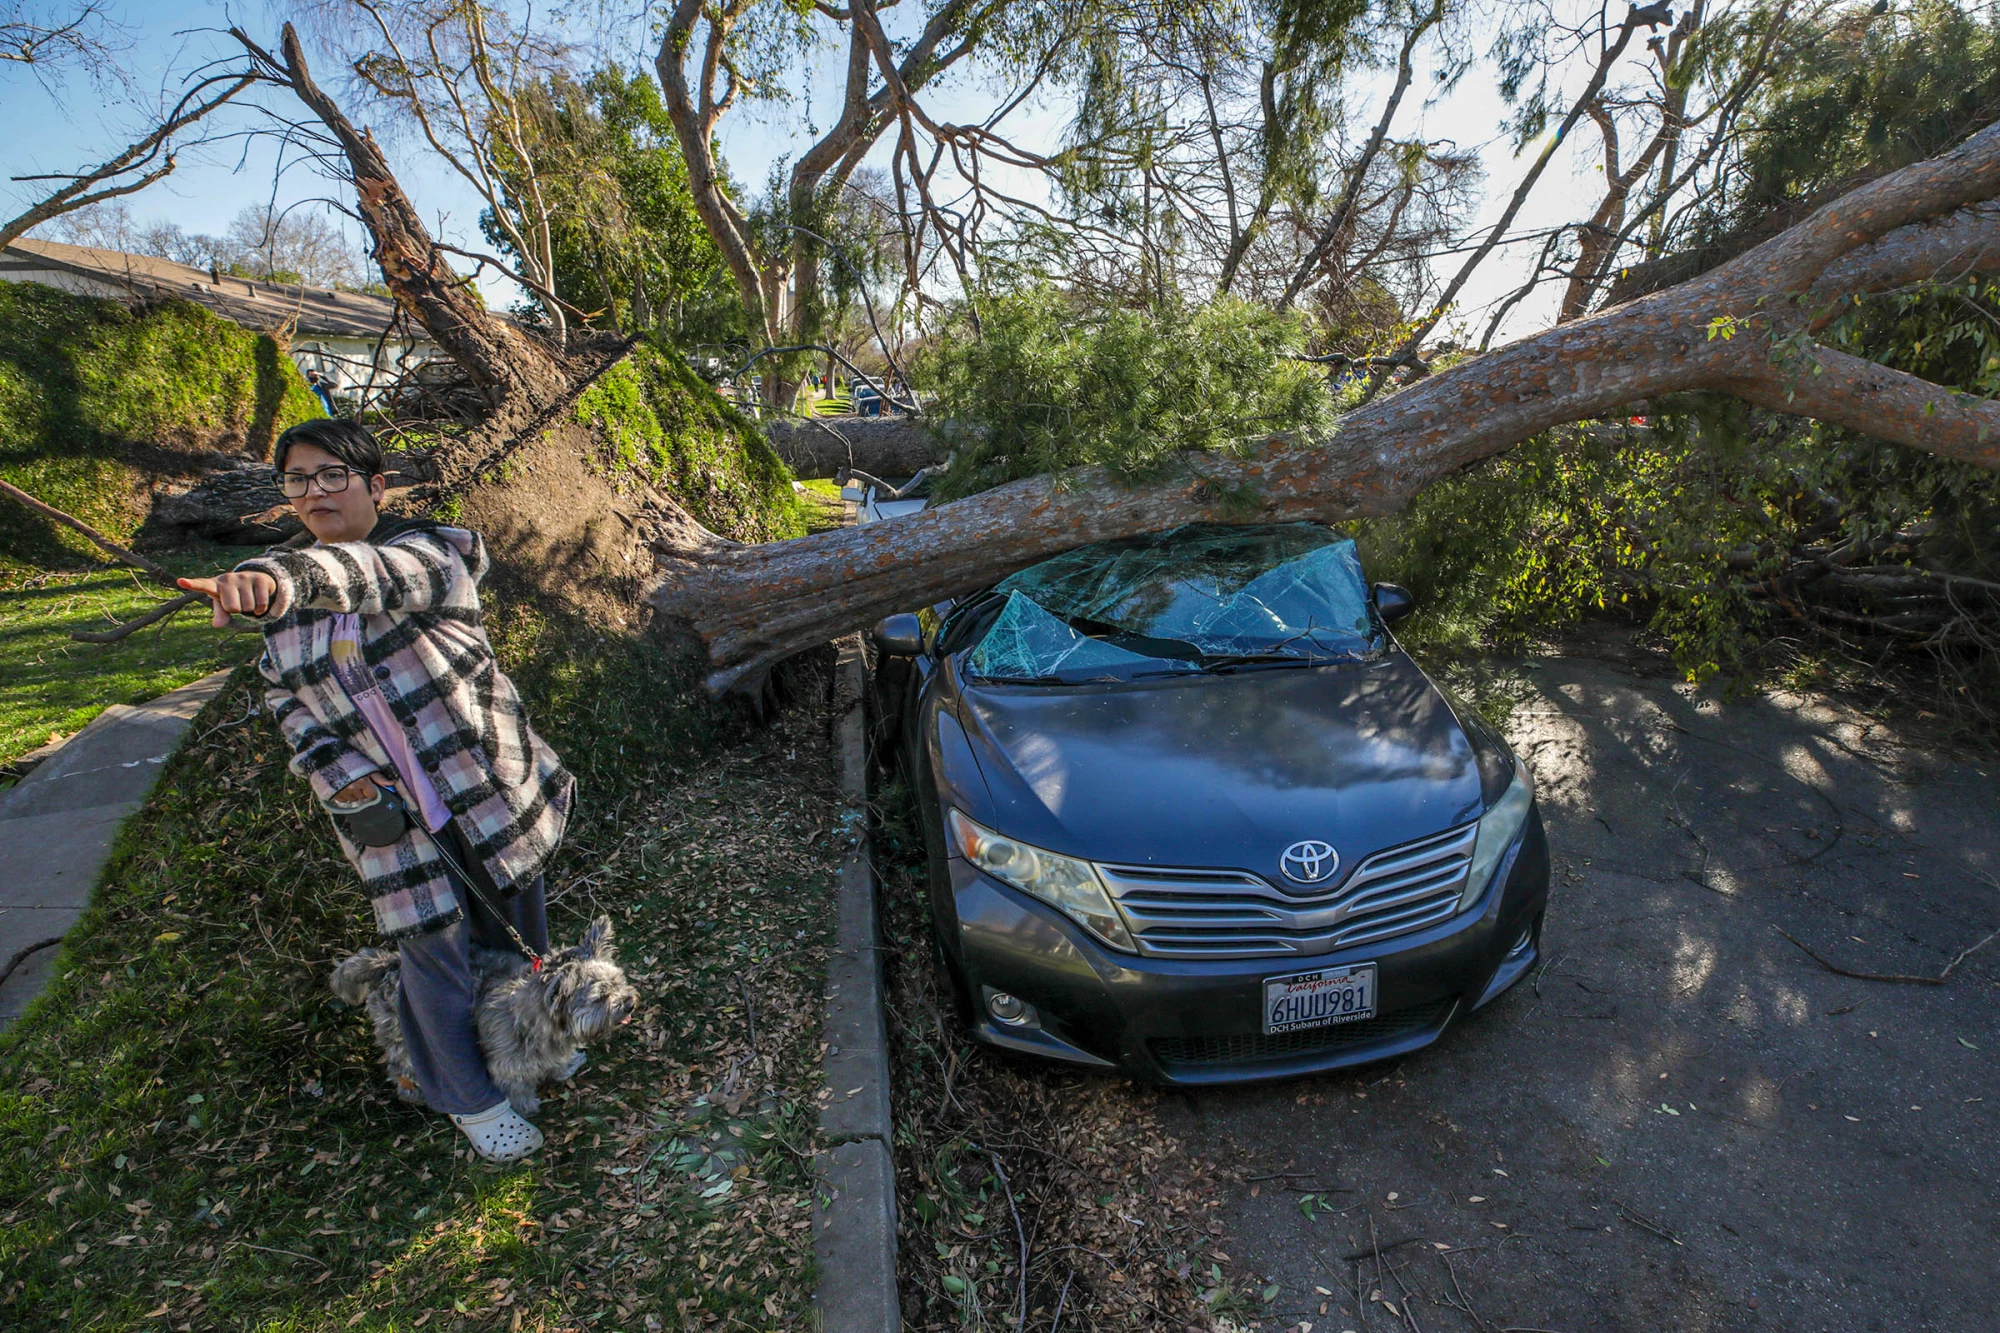 Photos: High winds topple trees in southern California - Los Angeles Times